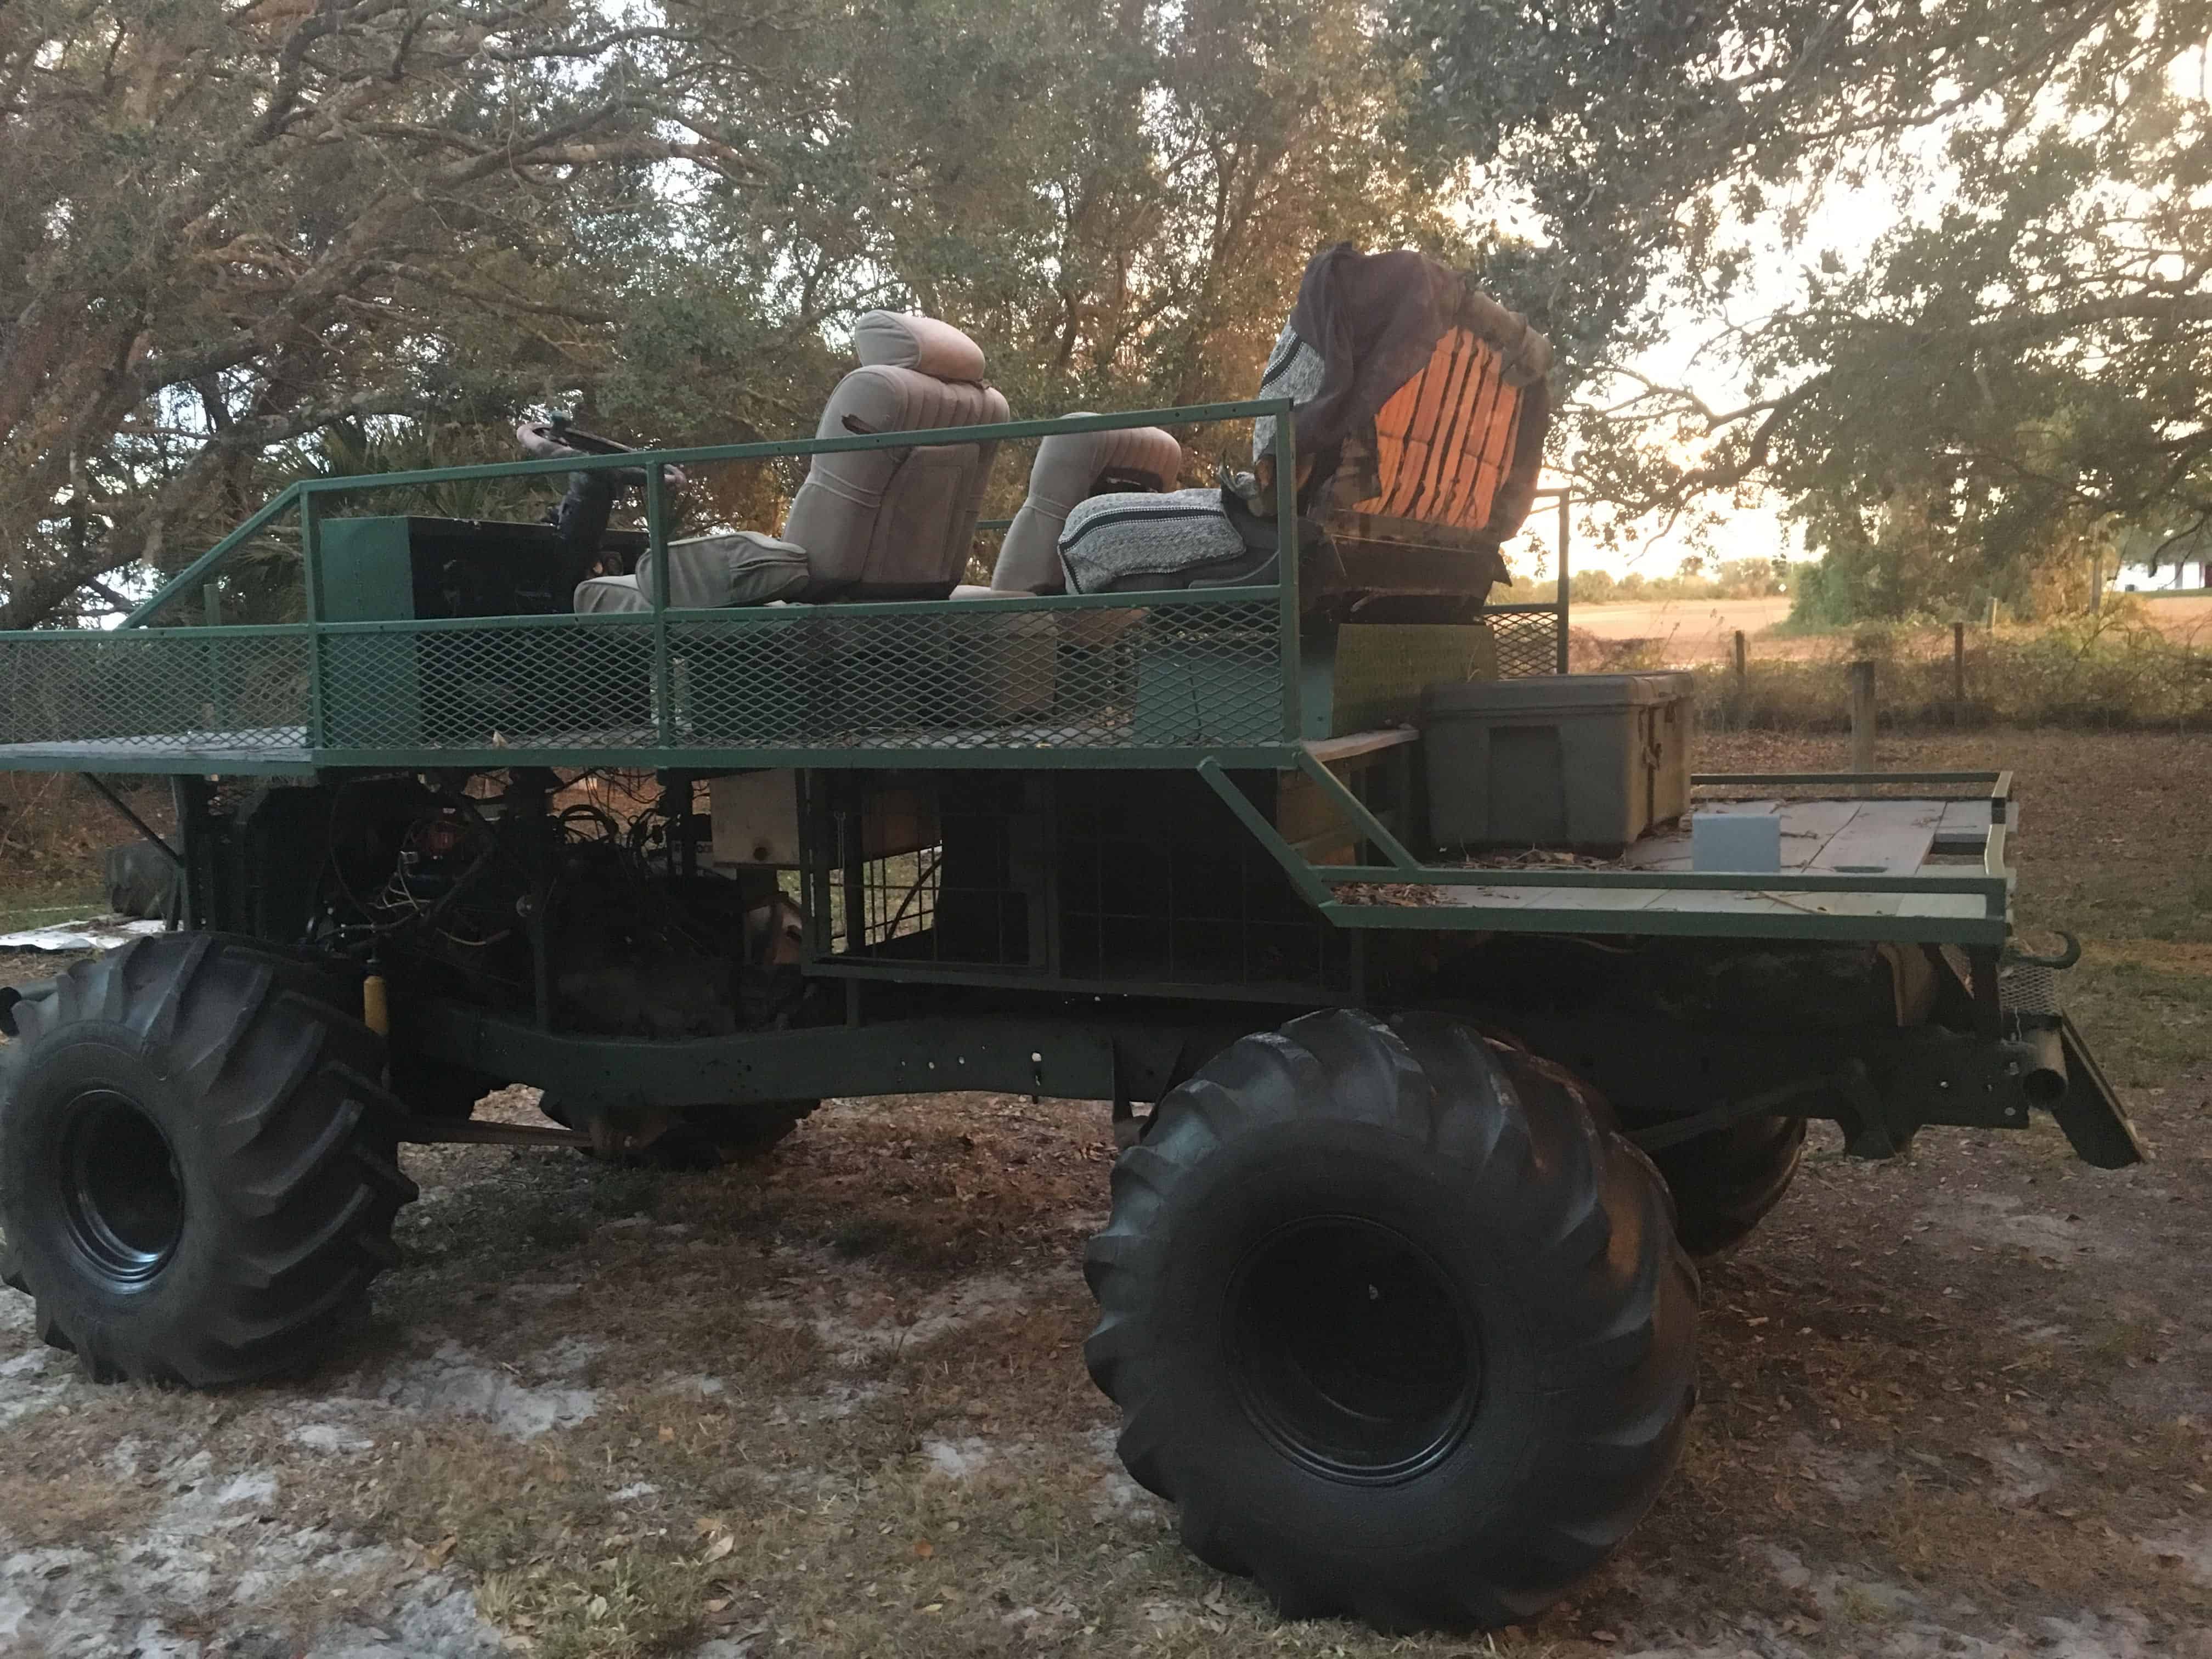 Swamp Buggy for getting around hunting camp